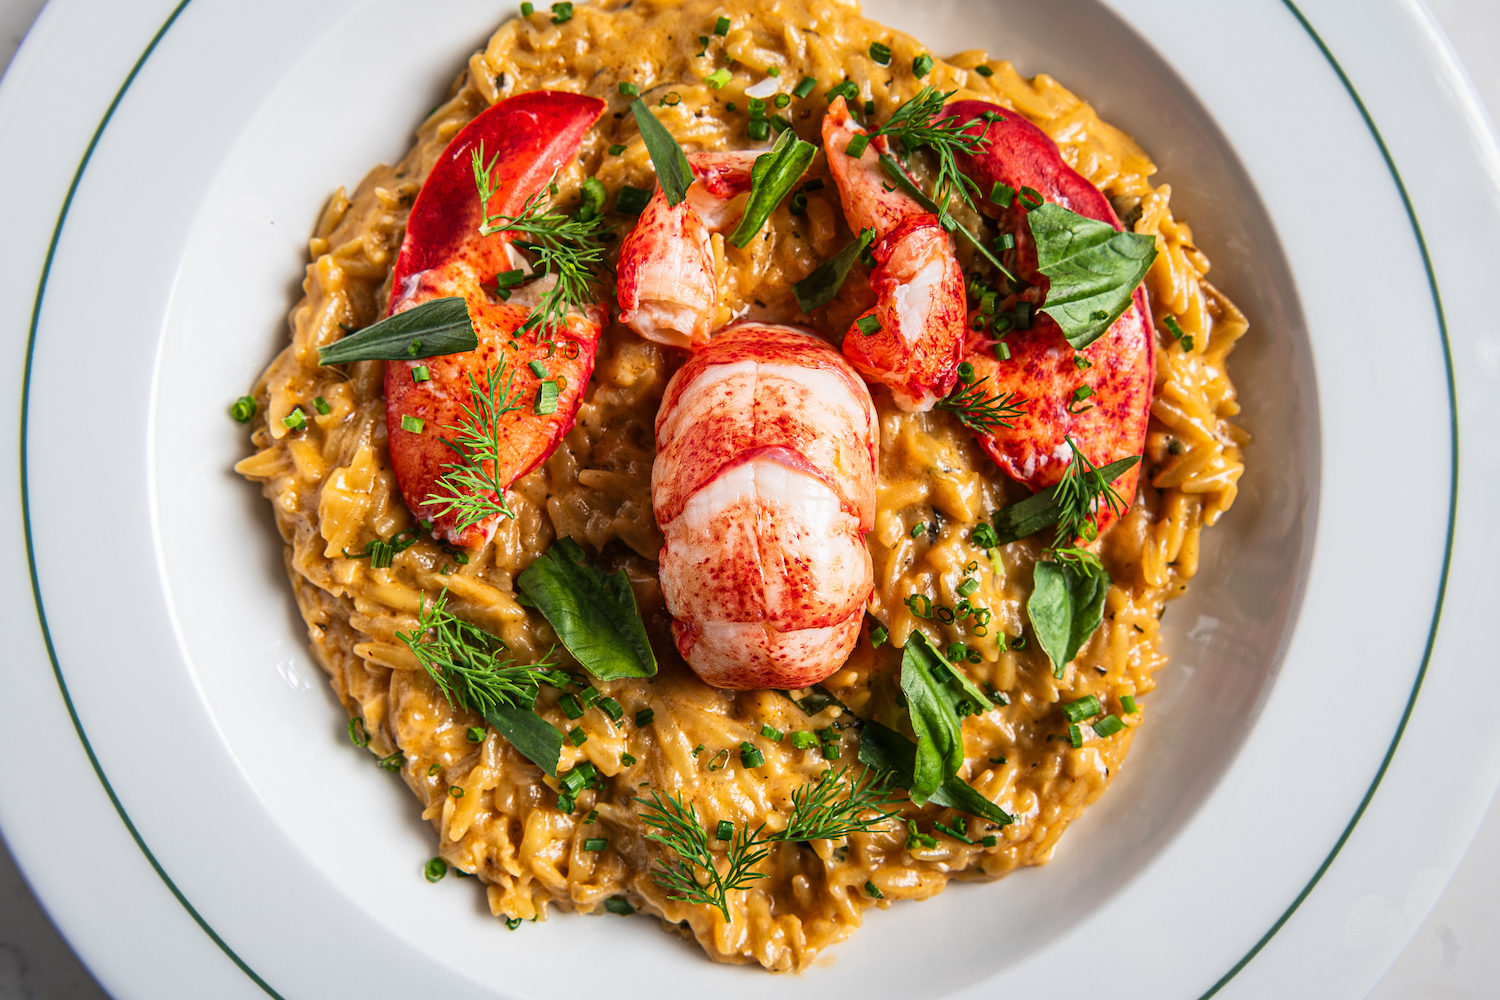 Orzo Al’Homard, made with Butter-Poached Lobster, Orzo Risotto, Truffled Crème Fraiche 